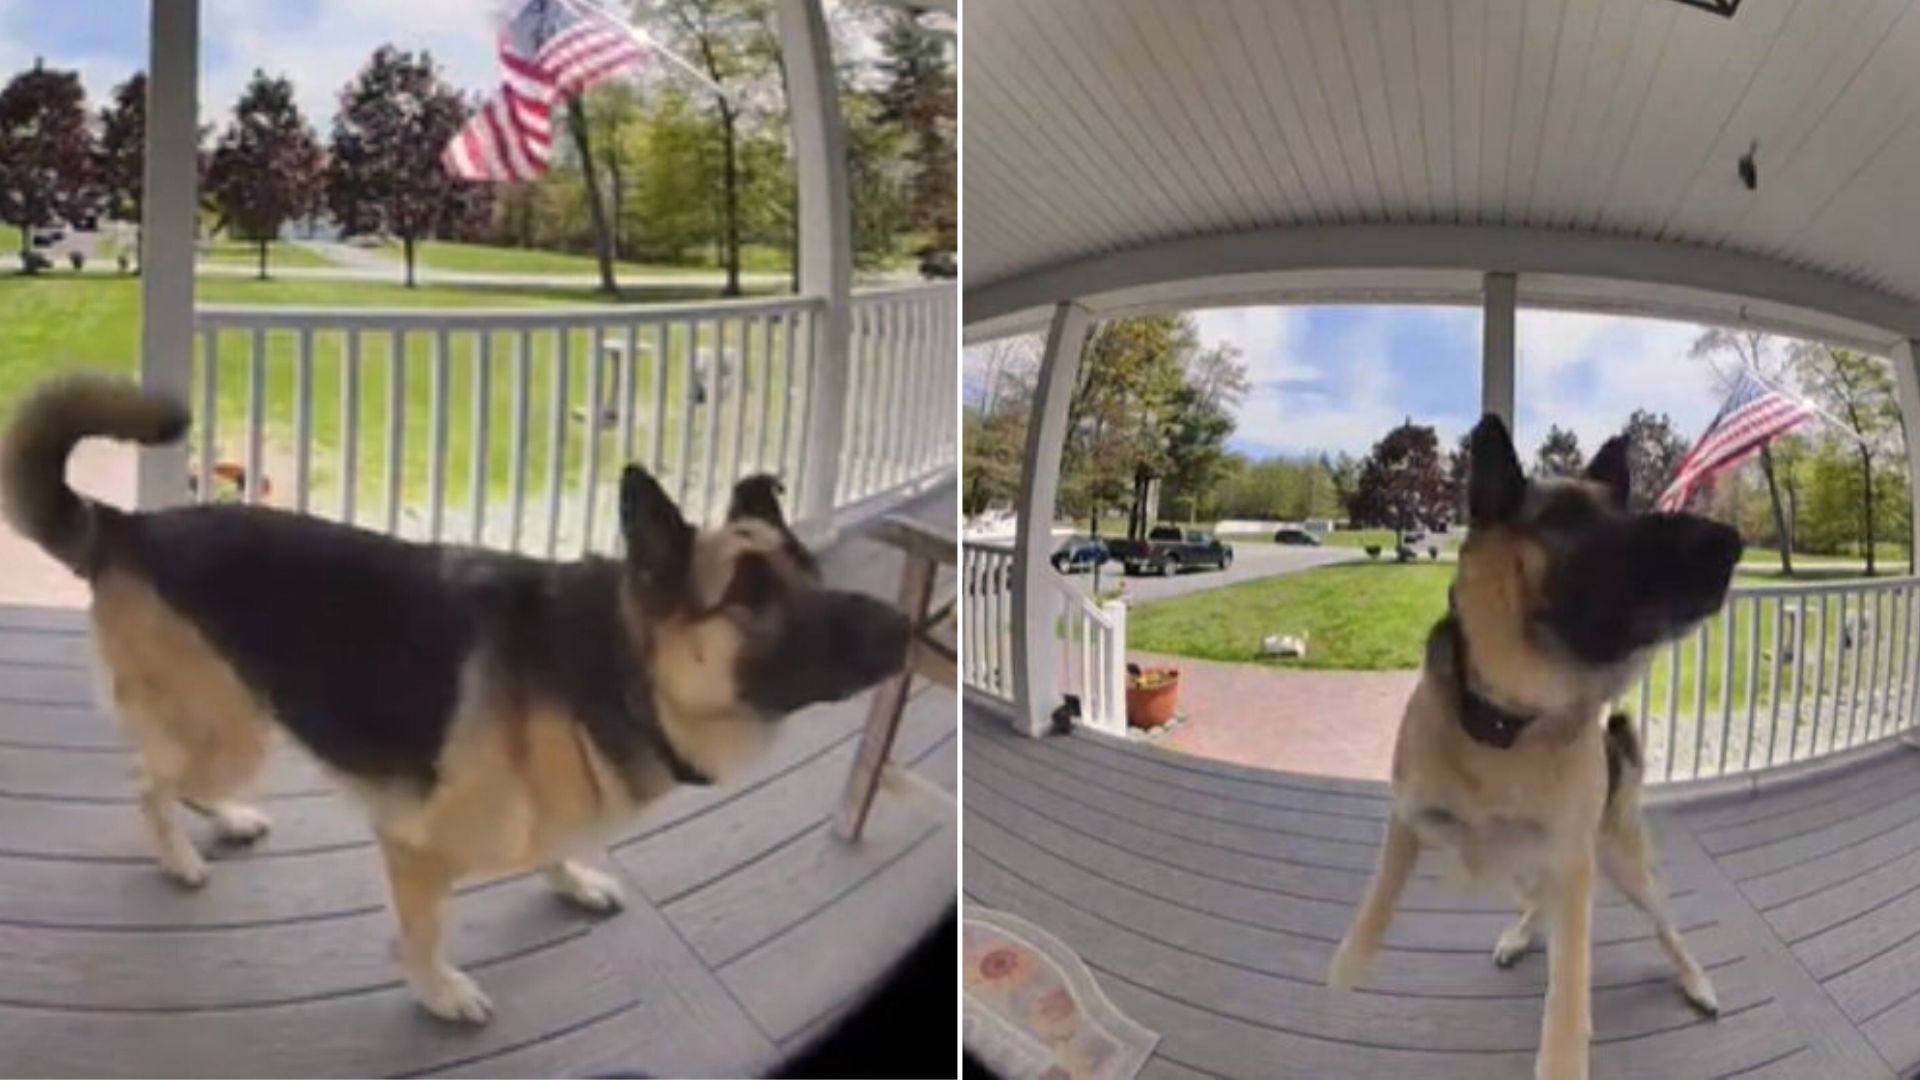 Witness How This Sweet German Shepherd ‘Protected’ His Family From An Unusual Intruder